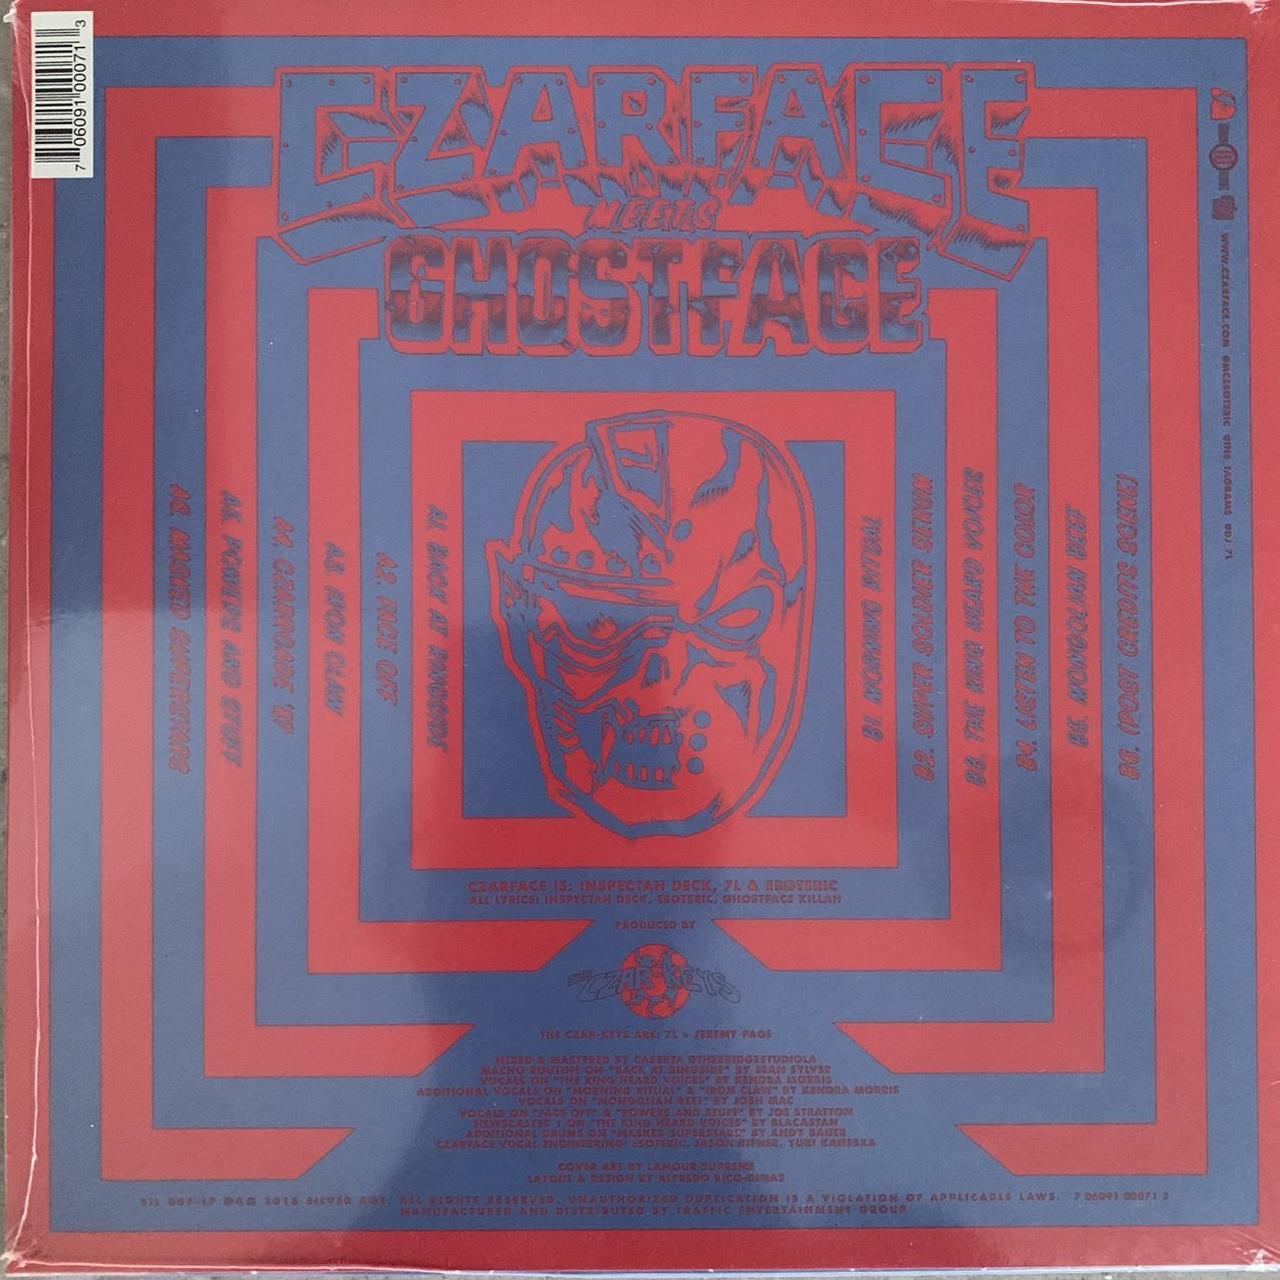 Czarface ‘Czarface Meets Ghostface’ 12 Track vinyl Album Feat “Back at Ringside” / “Face Off” and nuff more